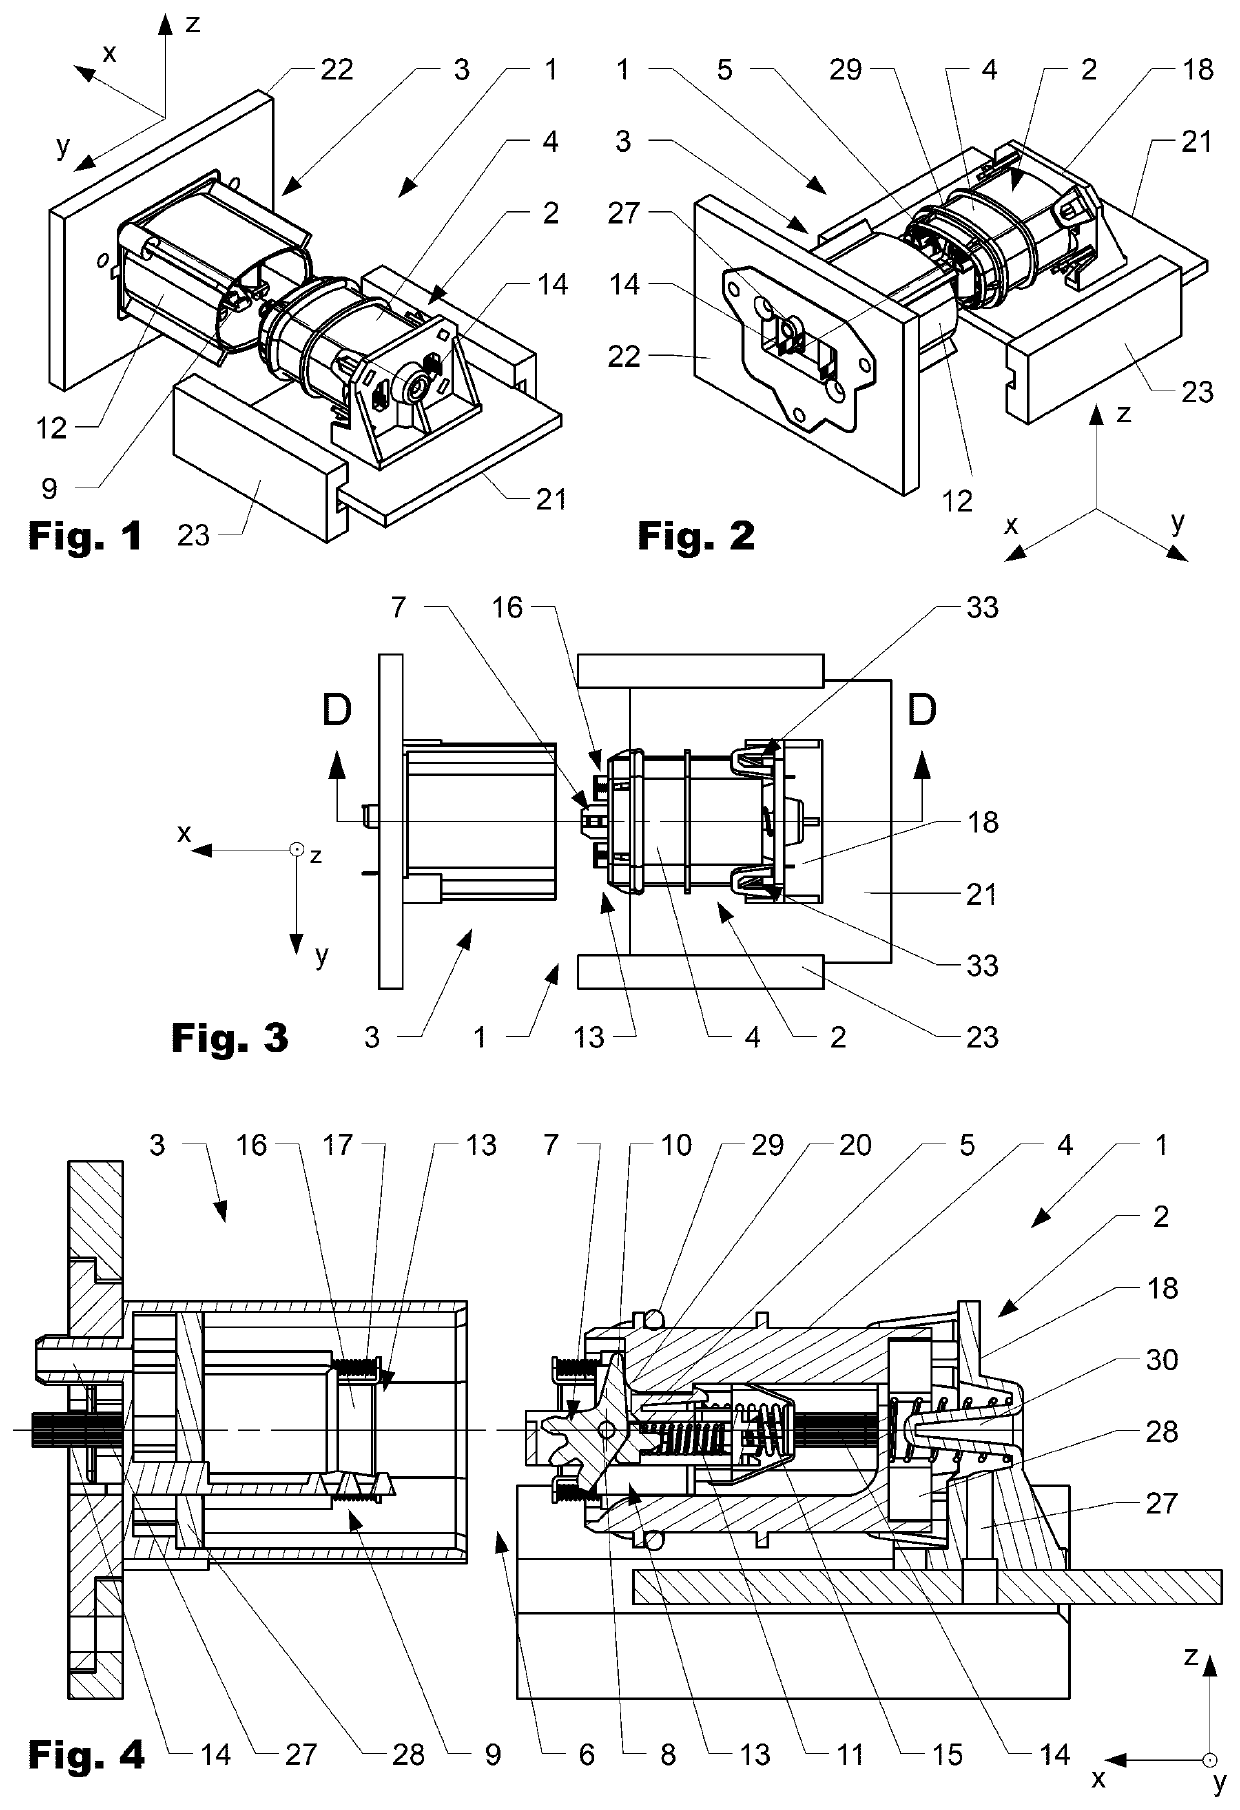 Optical connector assembly comprising a shutter